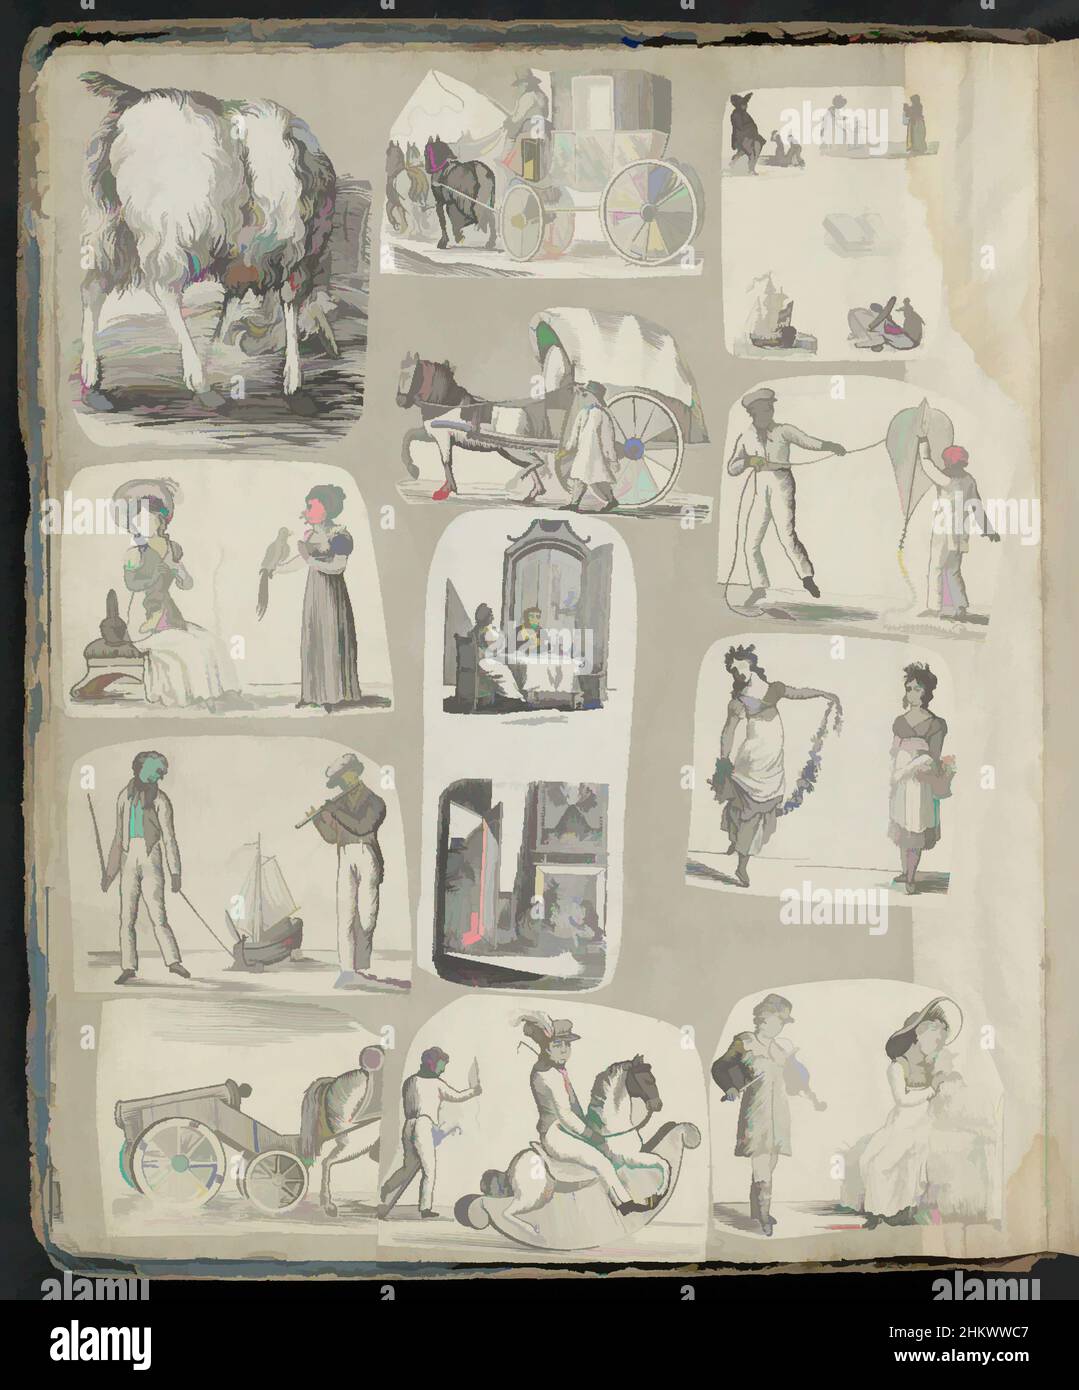 Art inspired by Album sheet with various representations, Album sheet with 11 cut-out representations from mainly folk prints, including of a buck, carriages and children's games. Lower left corner is cut out., print maker: Alexander Cranendoncq, Nijmegen, 1814 - 1869, paper, snipping, Classic works modernized by Artotop with a splash of modernity. Shapes, color and value, eye-catching visual impact on art. Emotions through freedom of artworks in a contemporary way. A timeless message pursuing a wildly creative new direction. Artists turning to the digital medium and creating the Artotop NFT Stock Photo